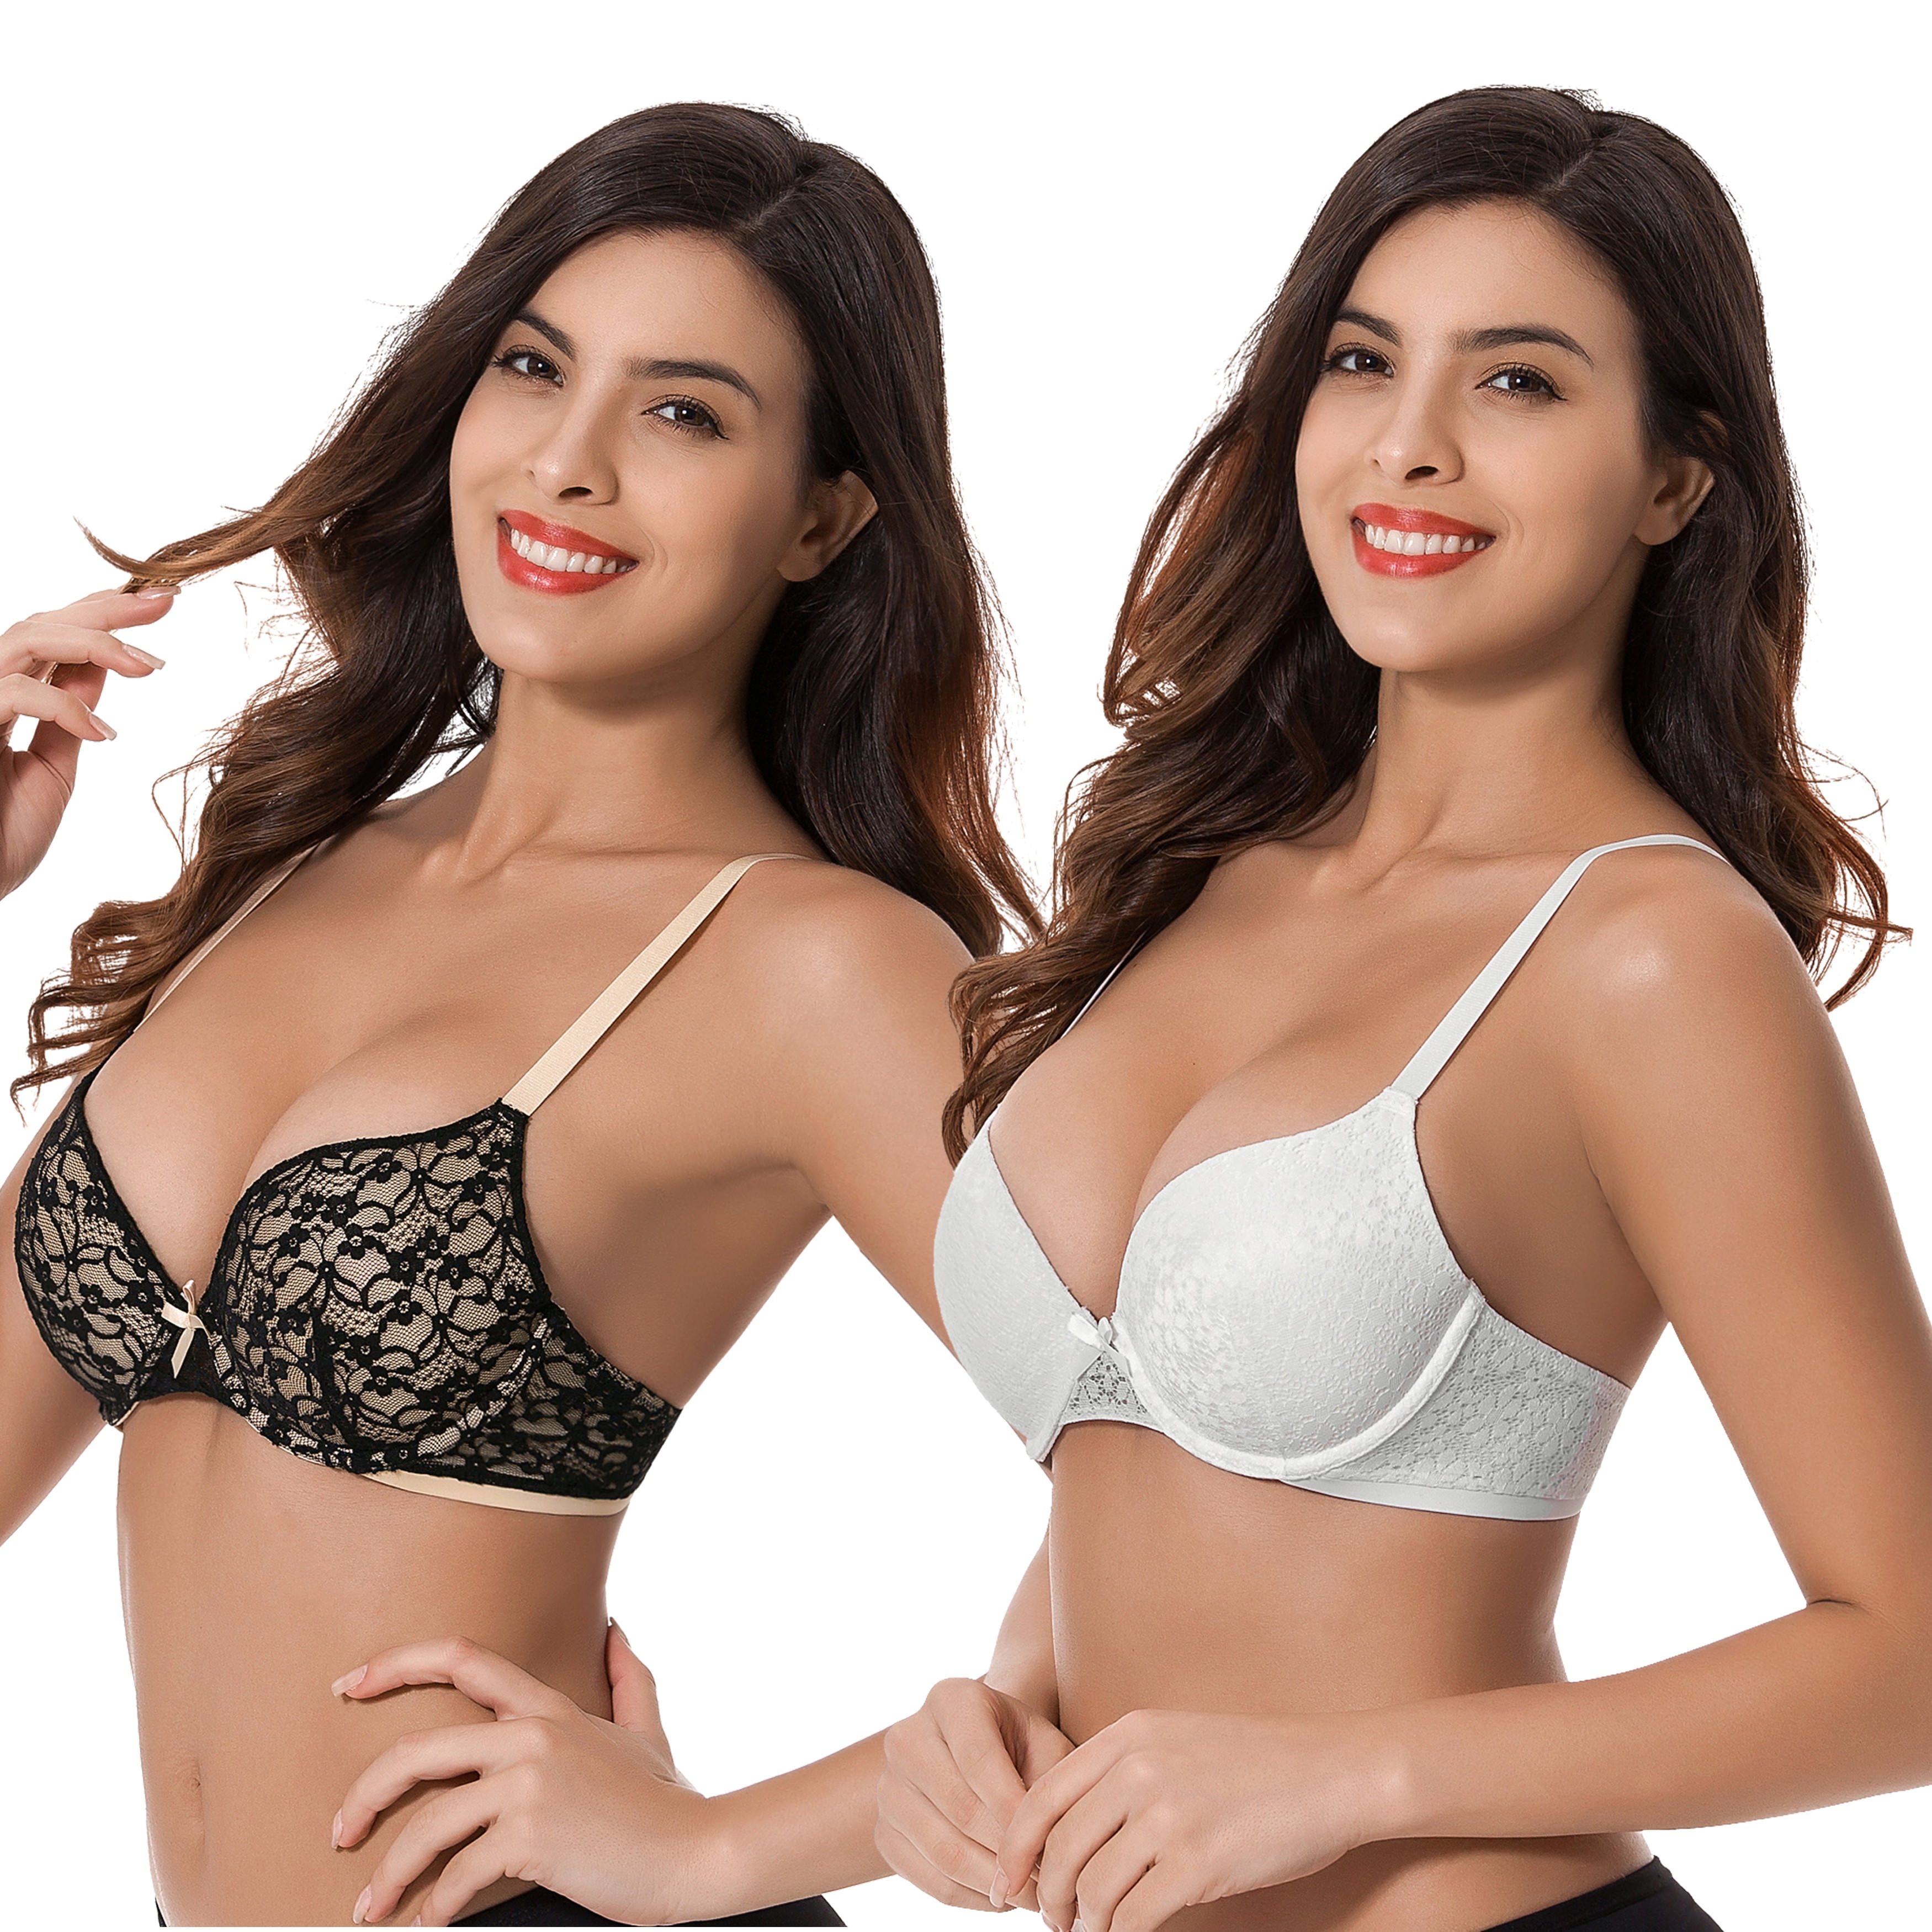 Curve Muse Women's Plus Size Add 1 and a Half Cup Push Up Underwire Bras -  ShopStyle